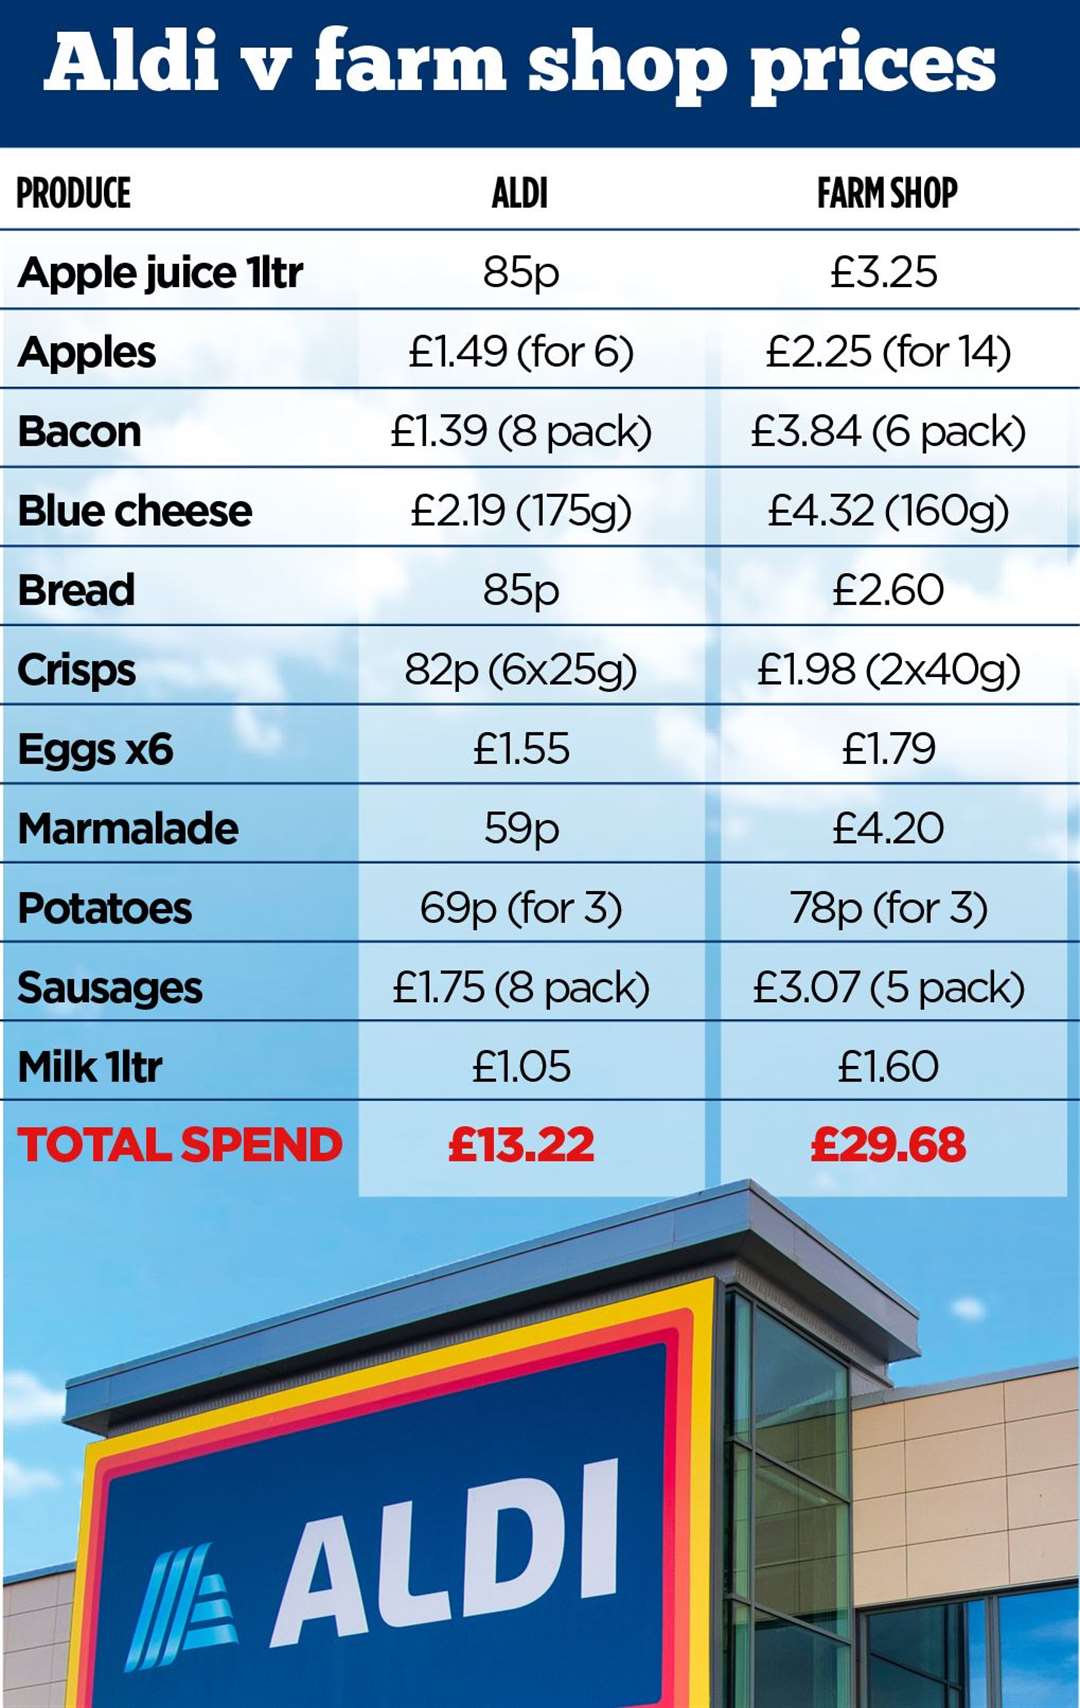 The difference in cost of an Aldi shop versus buying local was staggering